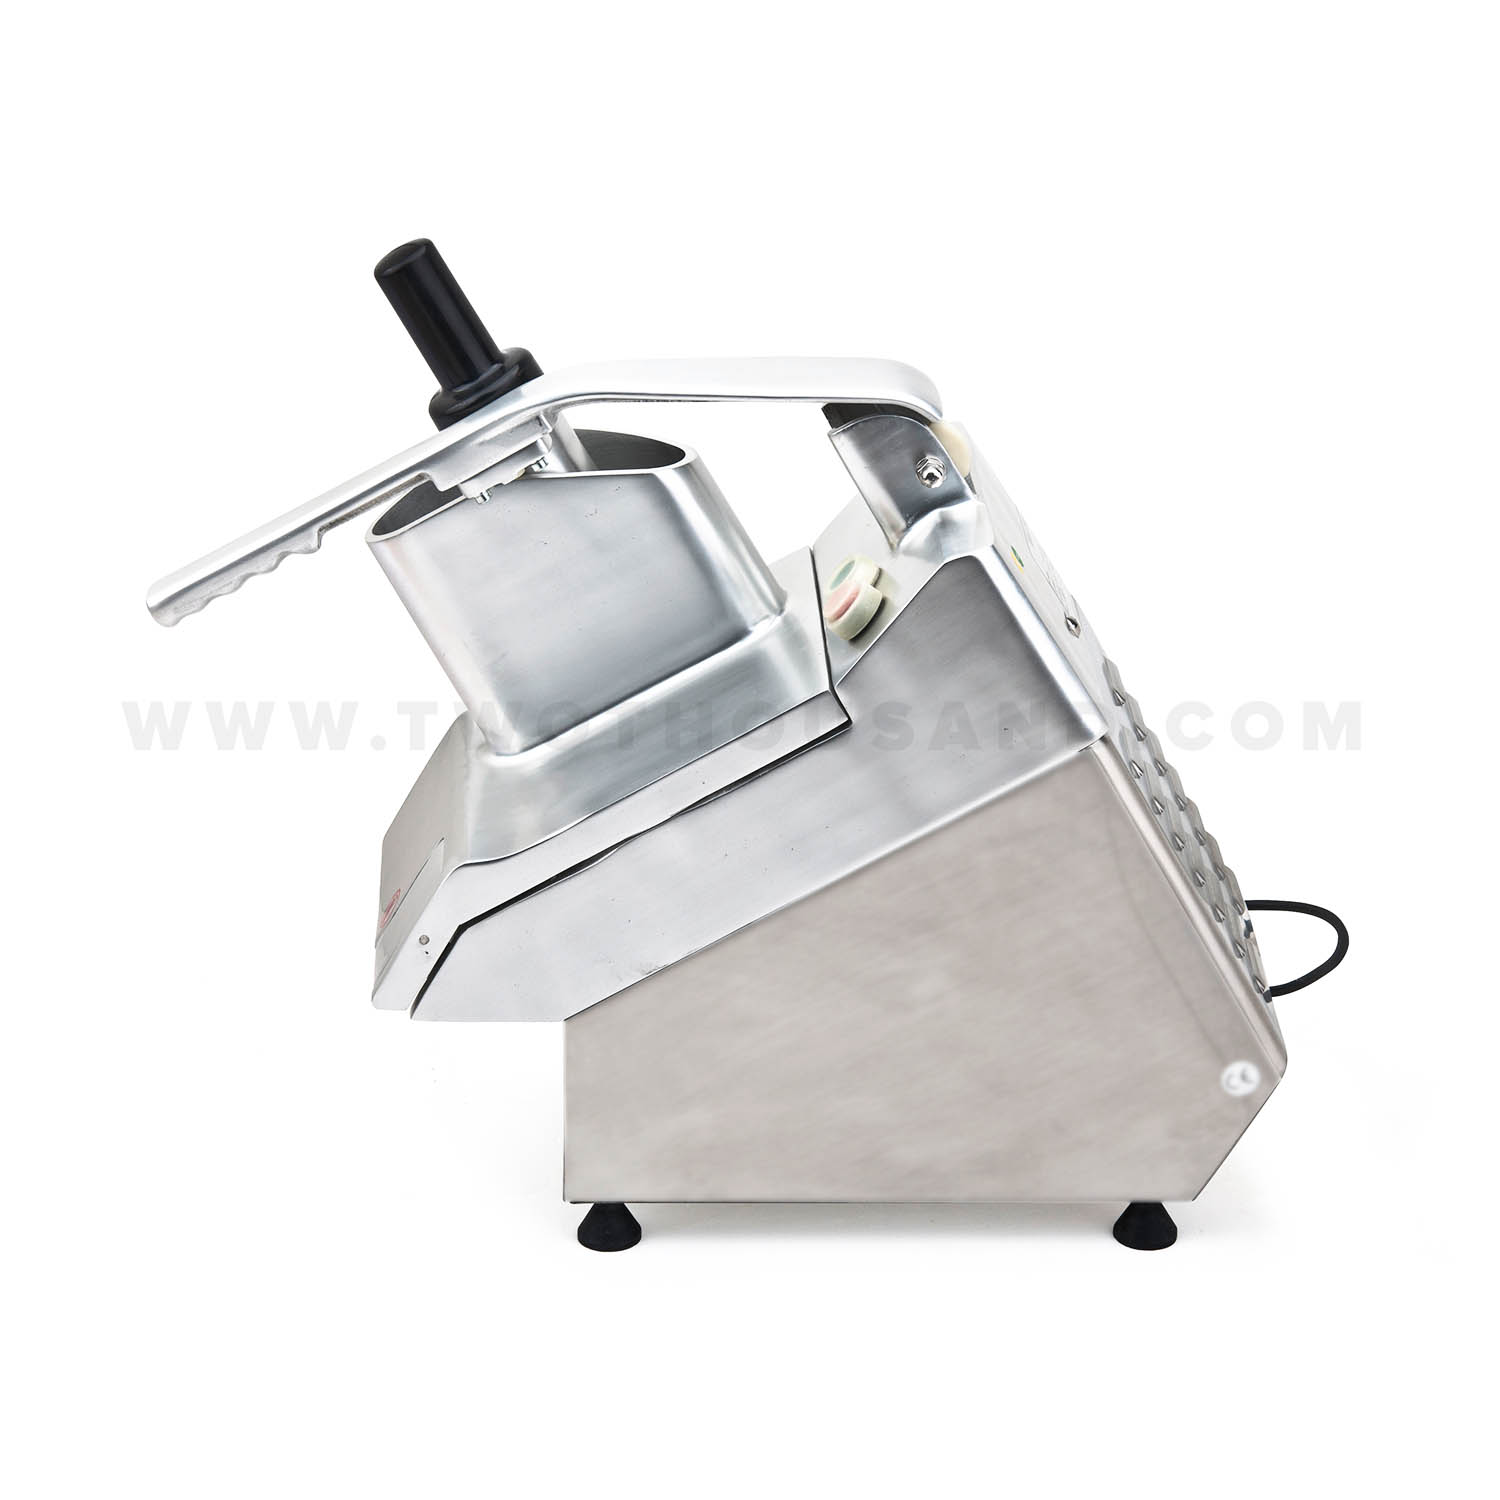 Commercial vegetable cutter - 55011 - Vollrath